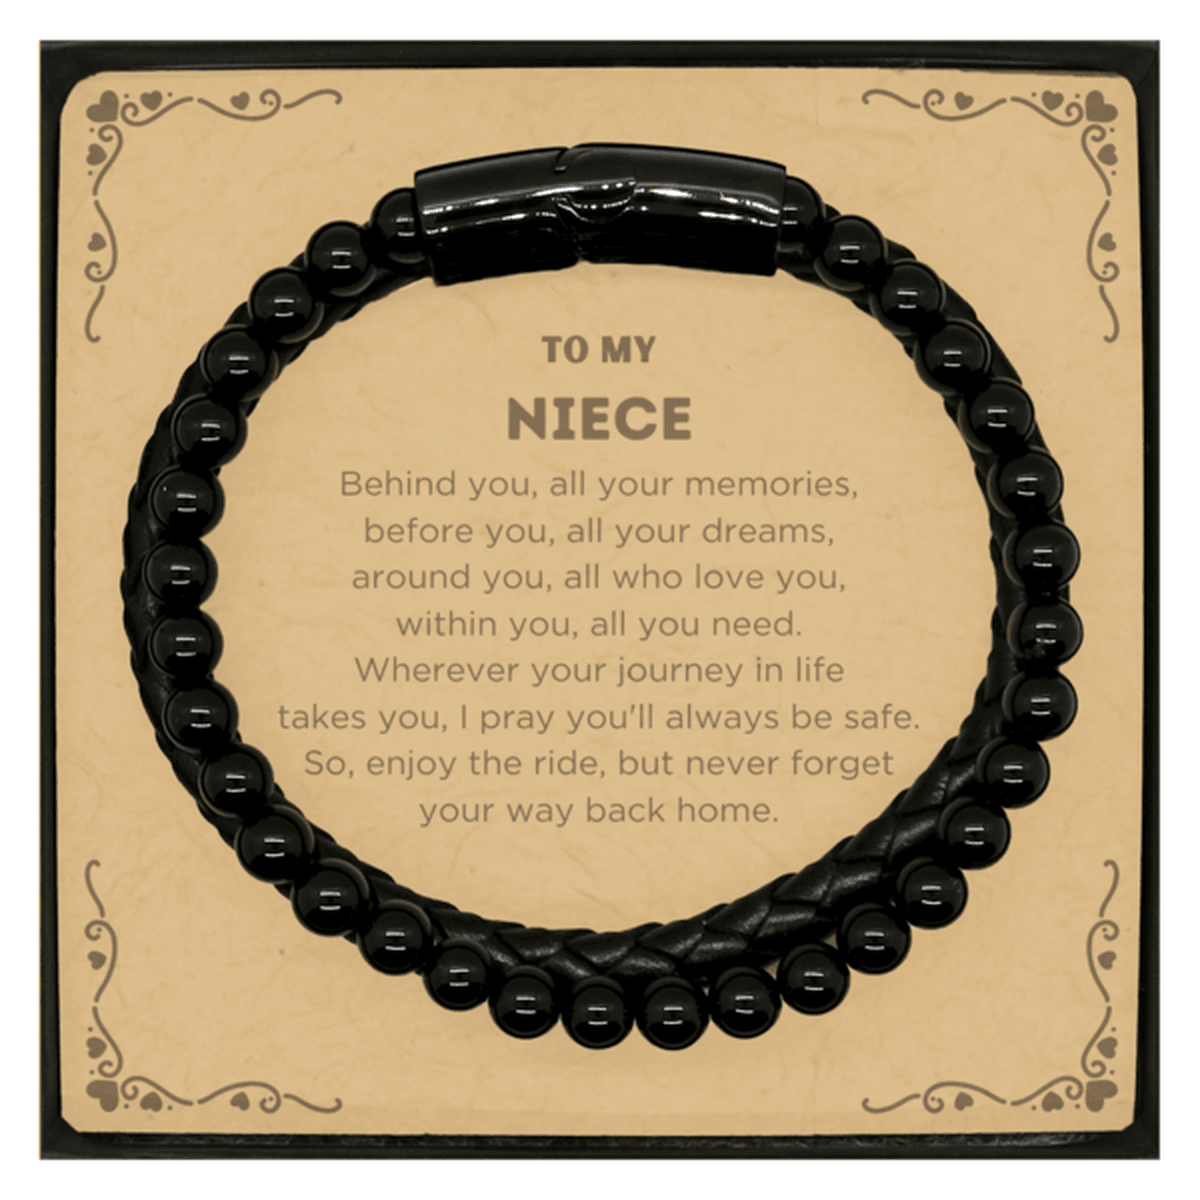 To My Niece Gifts, Inspirational Niece Stone Leather Bracelets, Sentimental Birthday Christmas Unique Gifts For Niece Behind you, all your memories, before you, all your dreams, around you, all who love you, within you, all you need